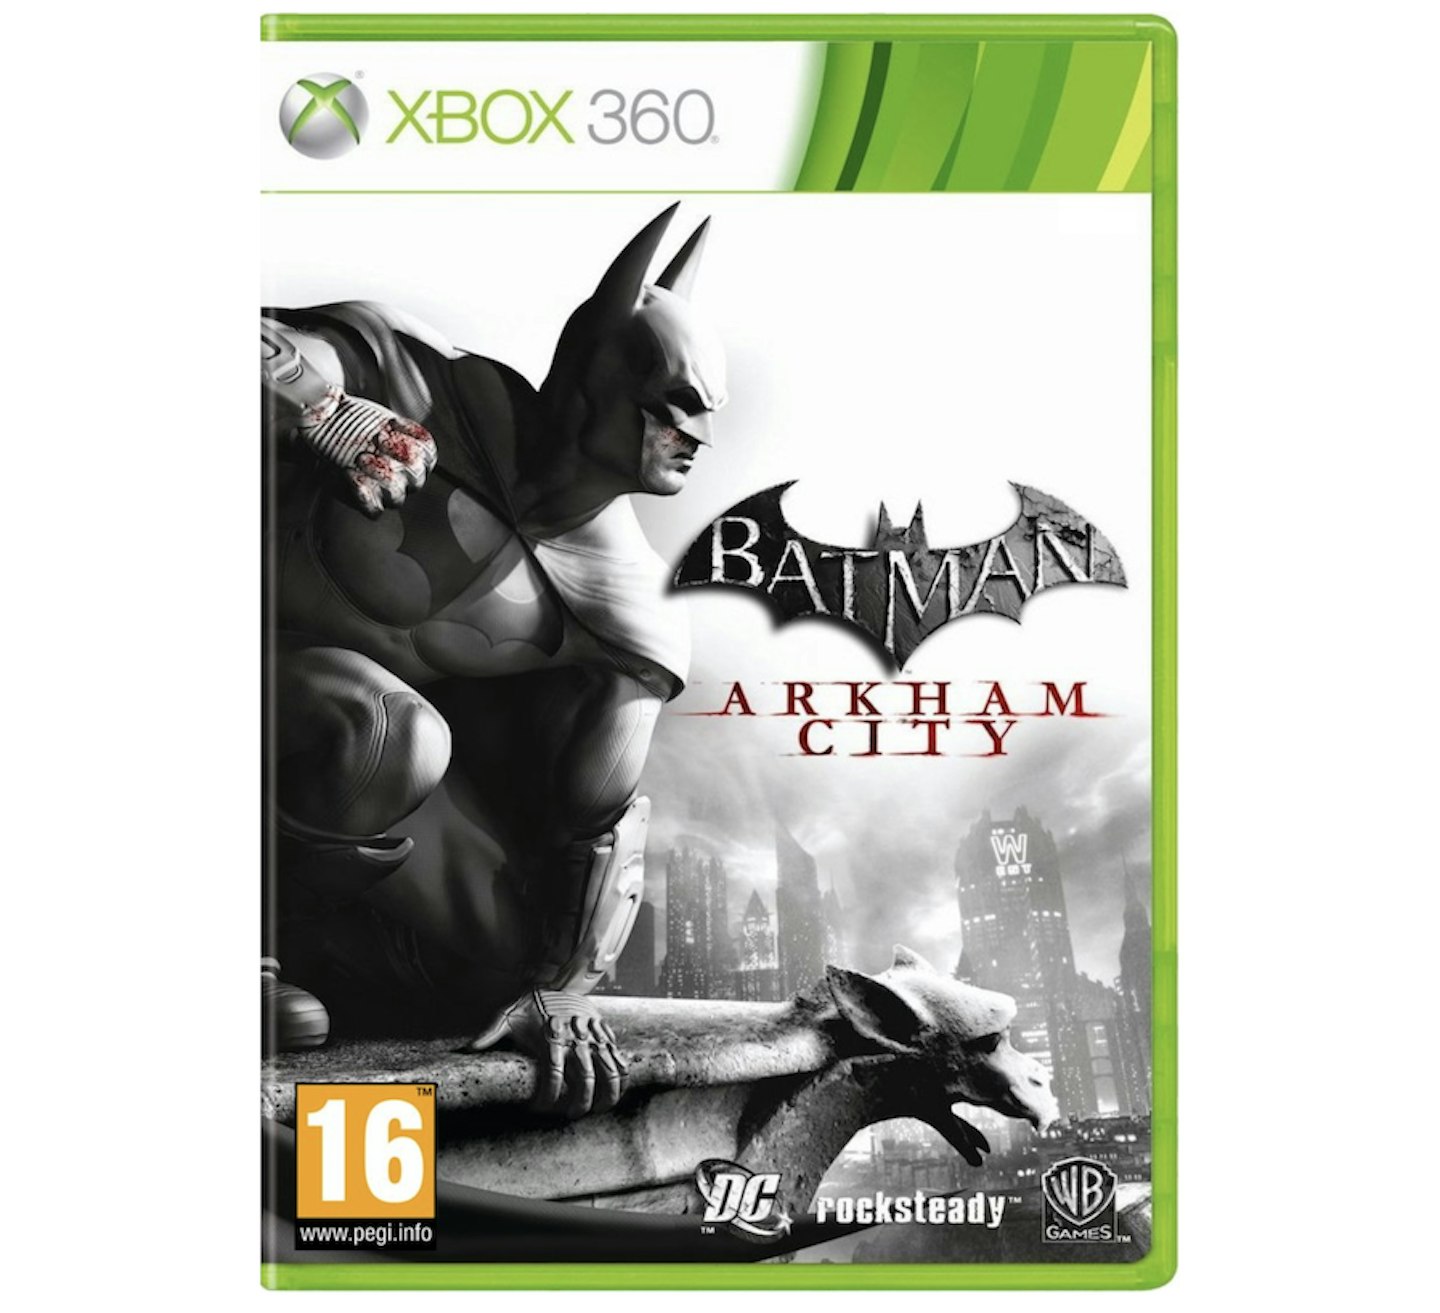 Batman: Arkham City, now available for PS4 and Xbox One with the Batman Arkham Collection, £37